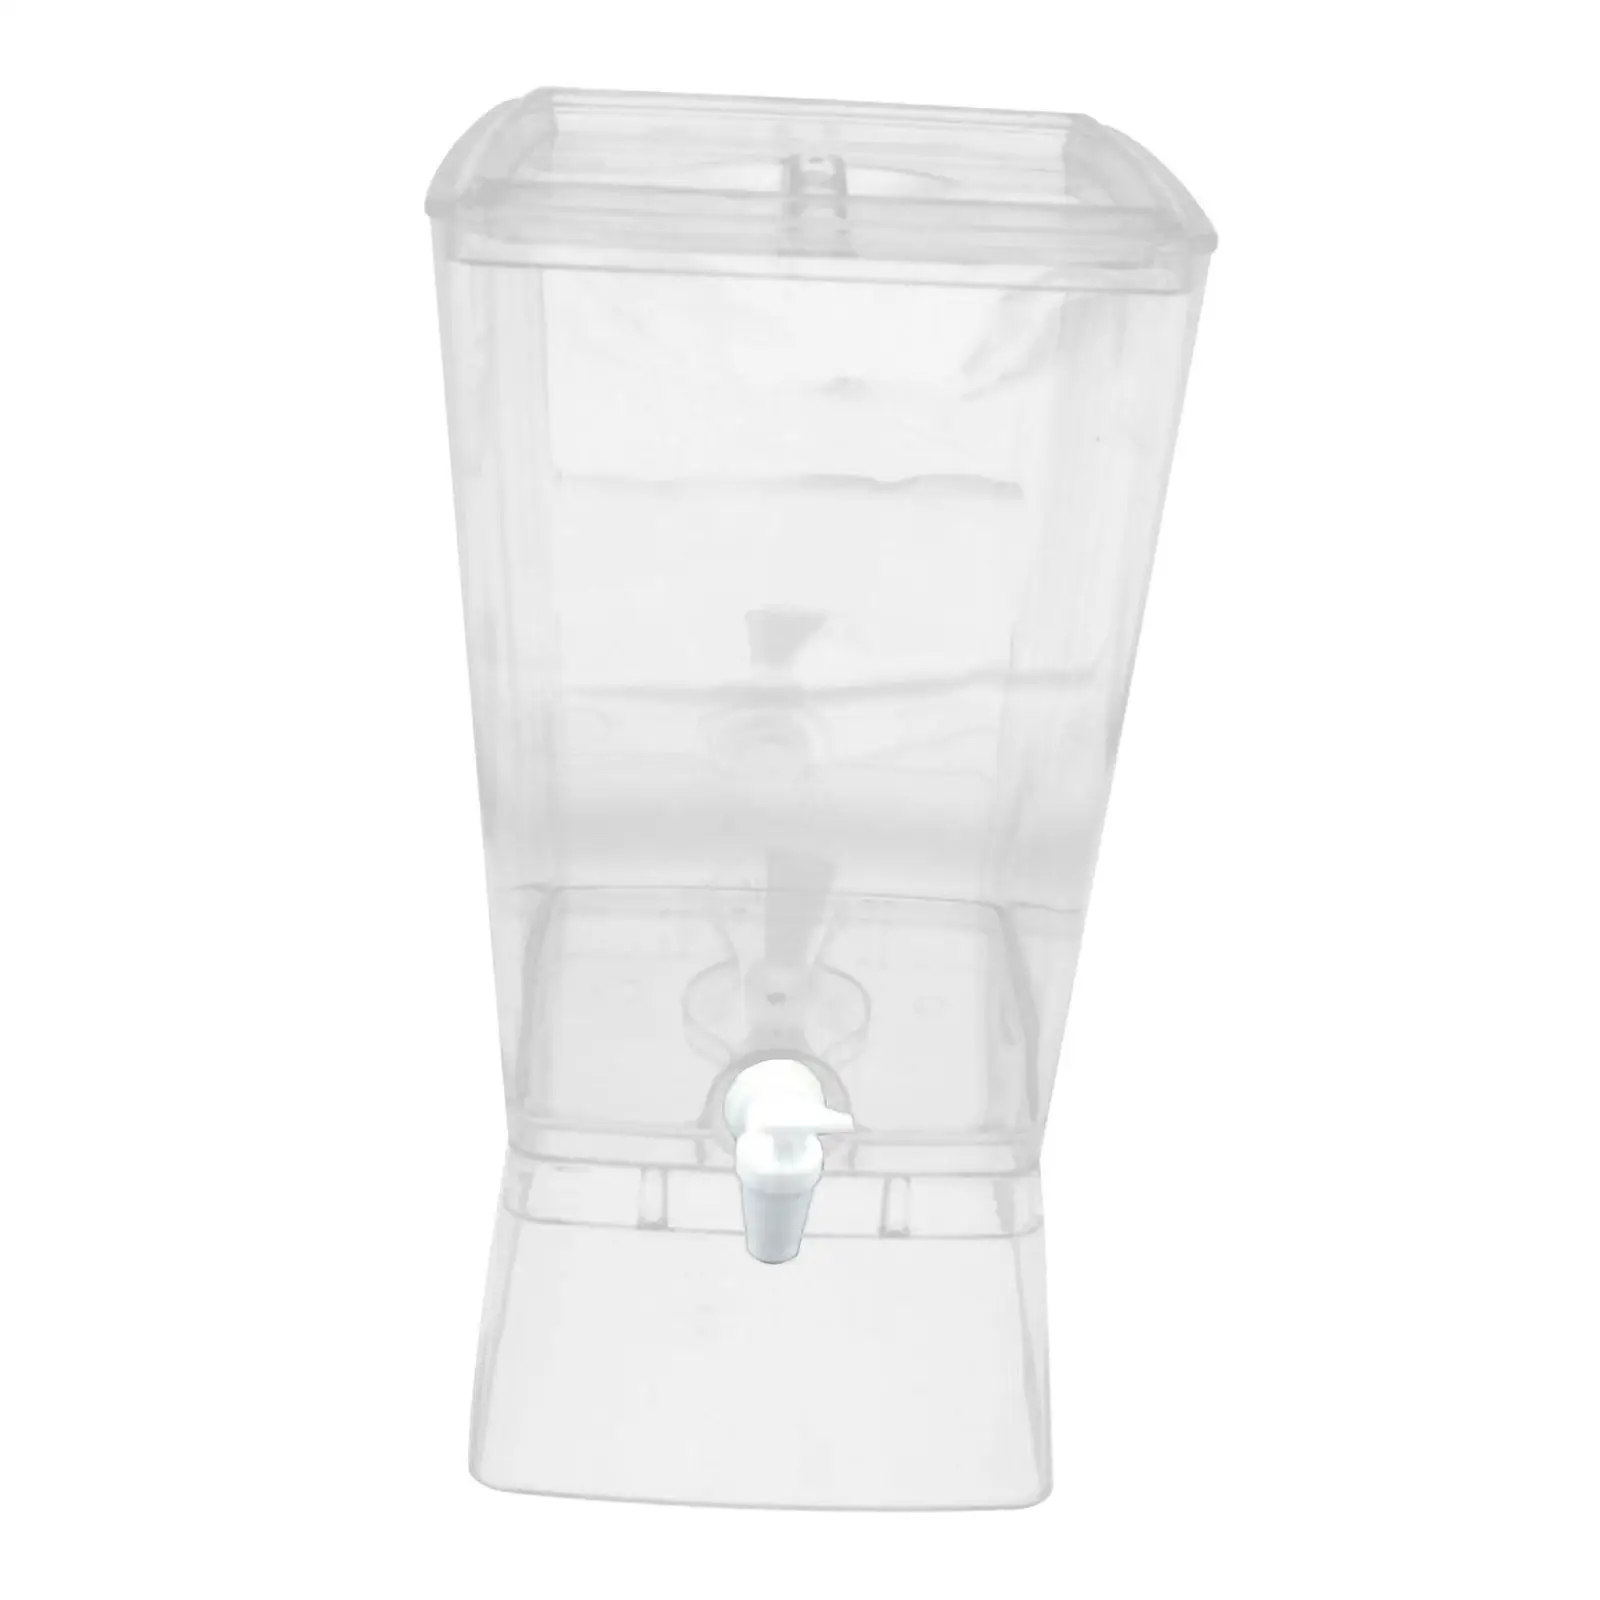 Beverage Dispenser Multifunctional with Spigot 10L Sturdy Clear Cold Drink Container for Refrigerator Wedding Bar Indoor Camping